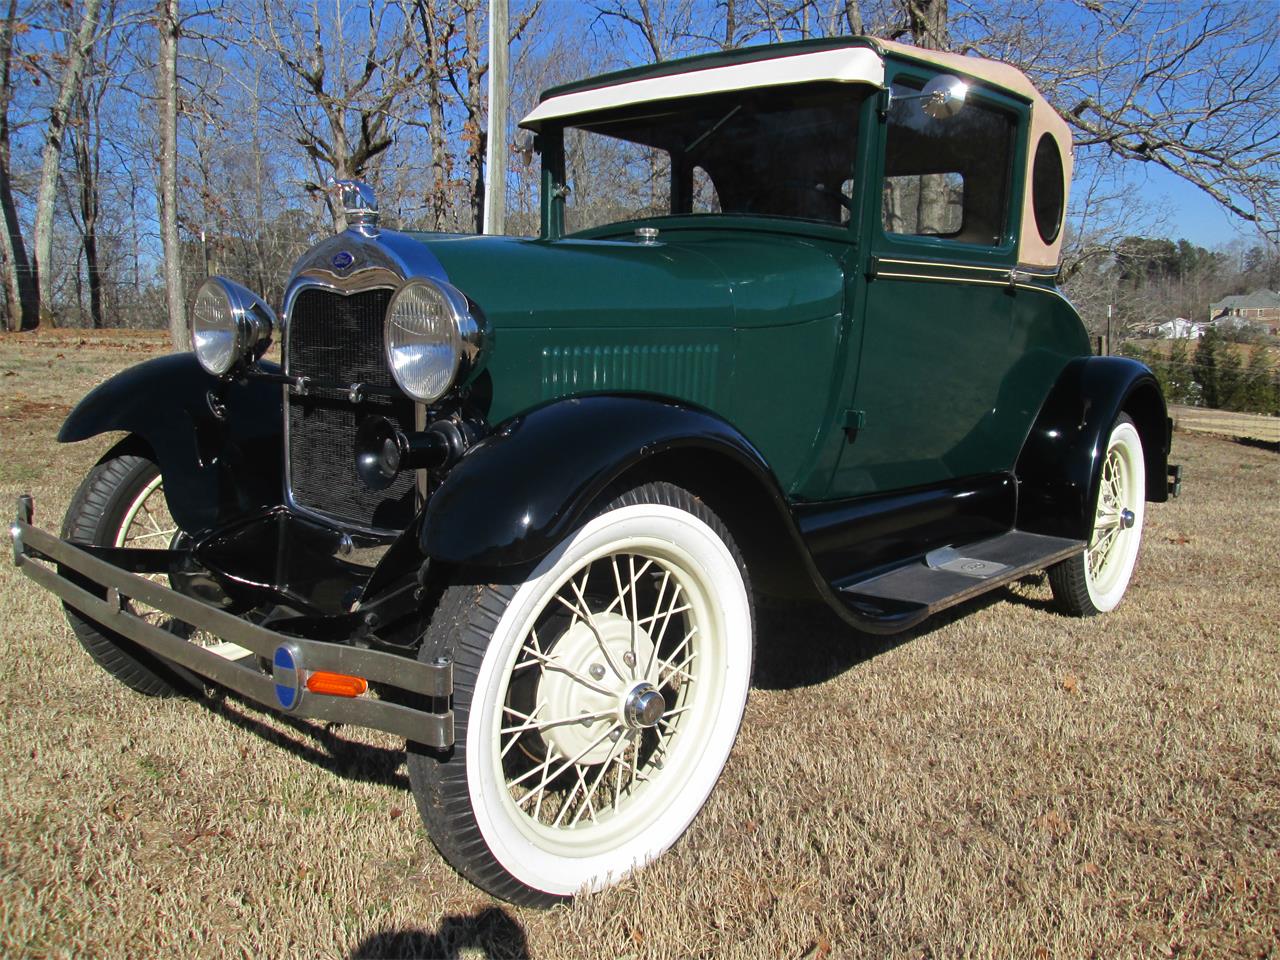 For Sale: 1929 Ford Model A in Canton, Georgia for sale in Canton, GA